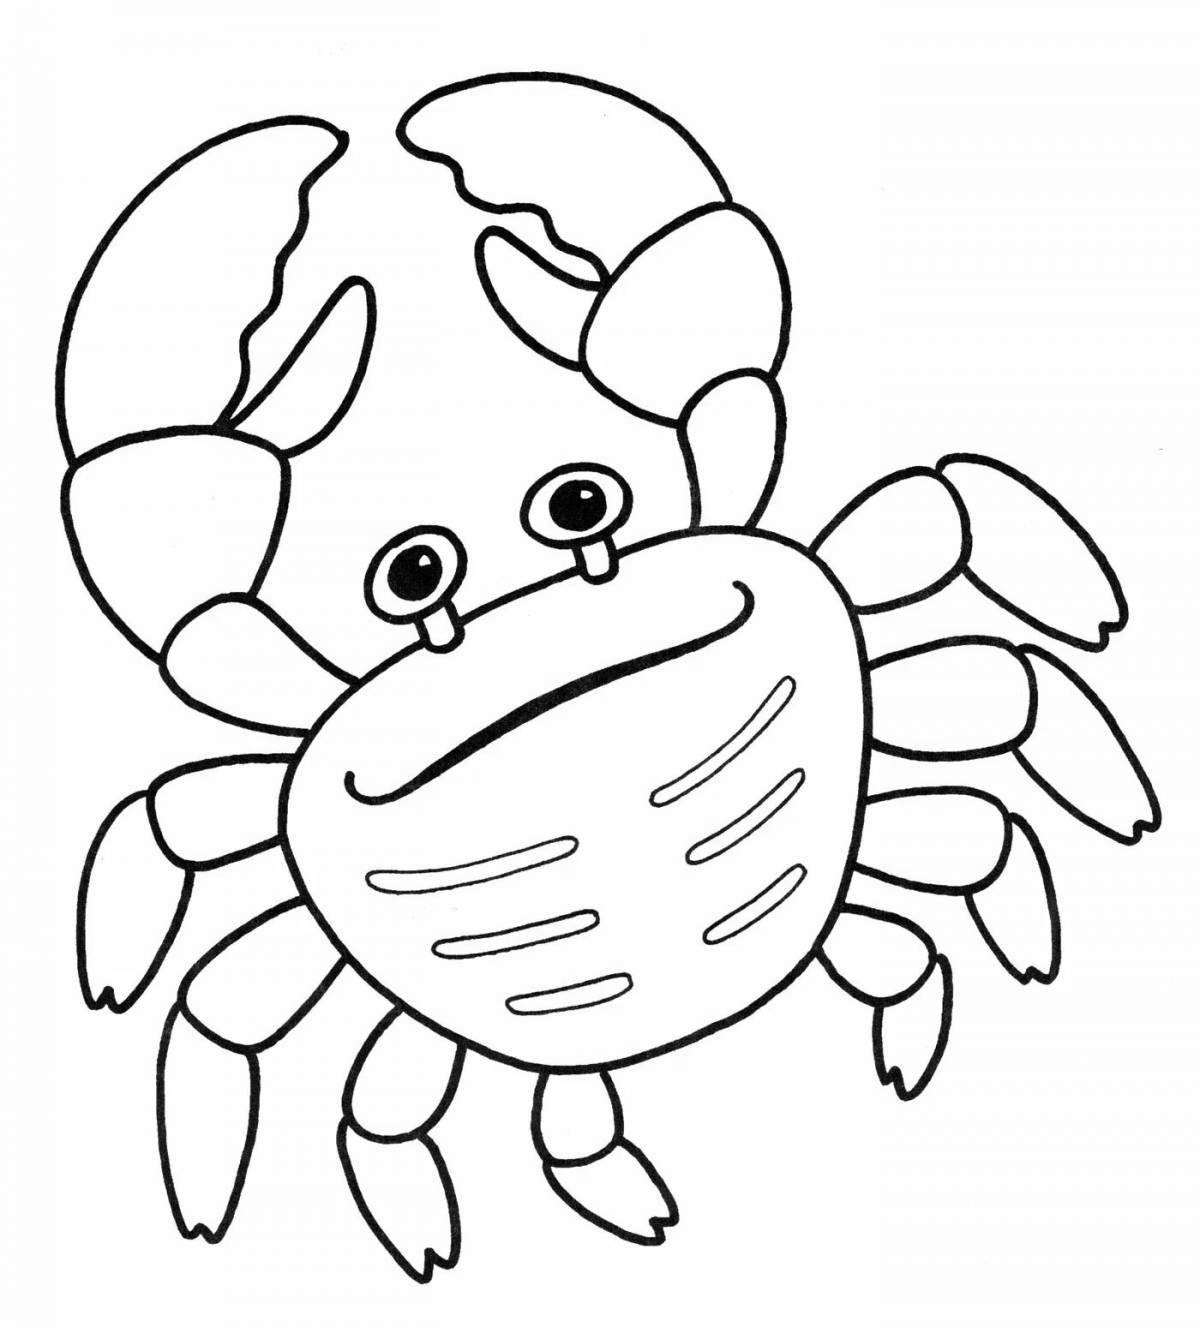 Crab for kids #12